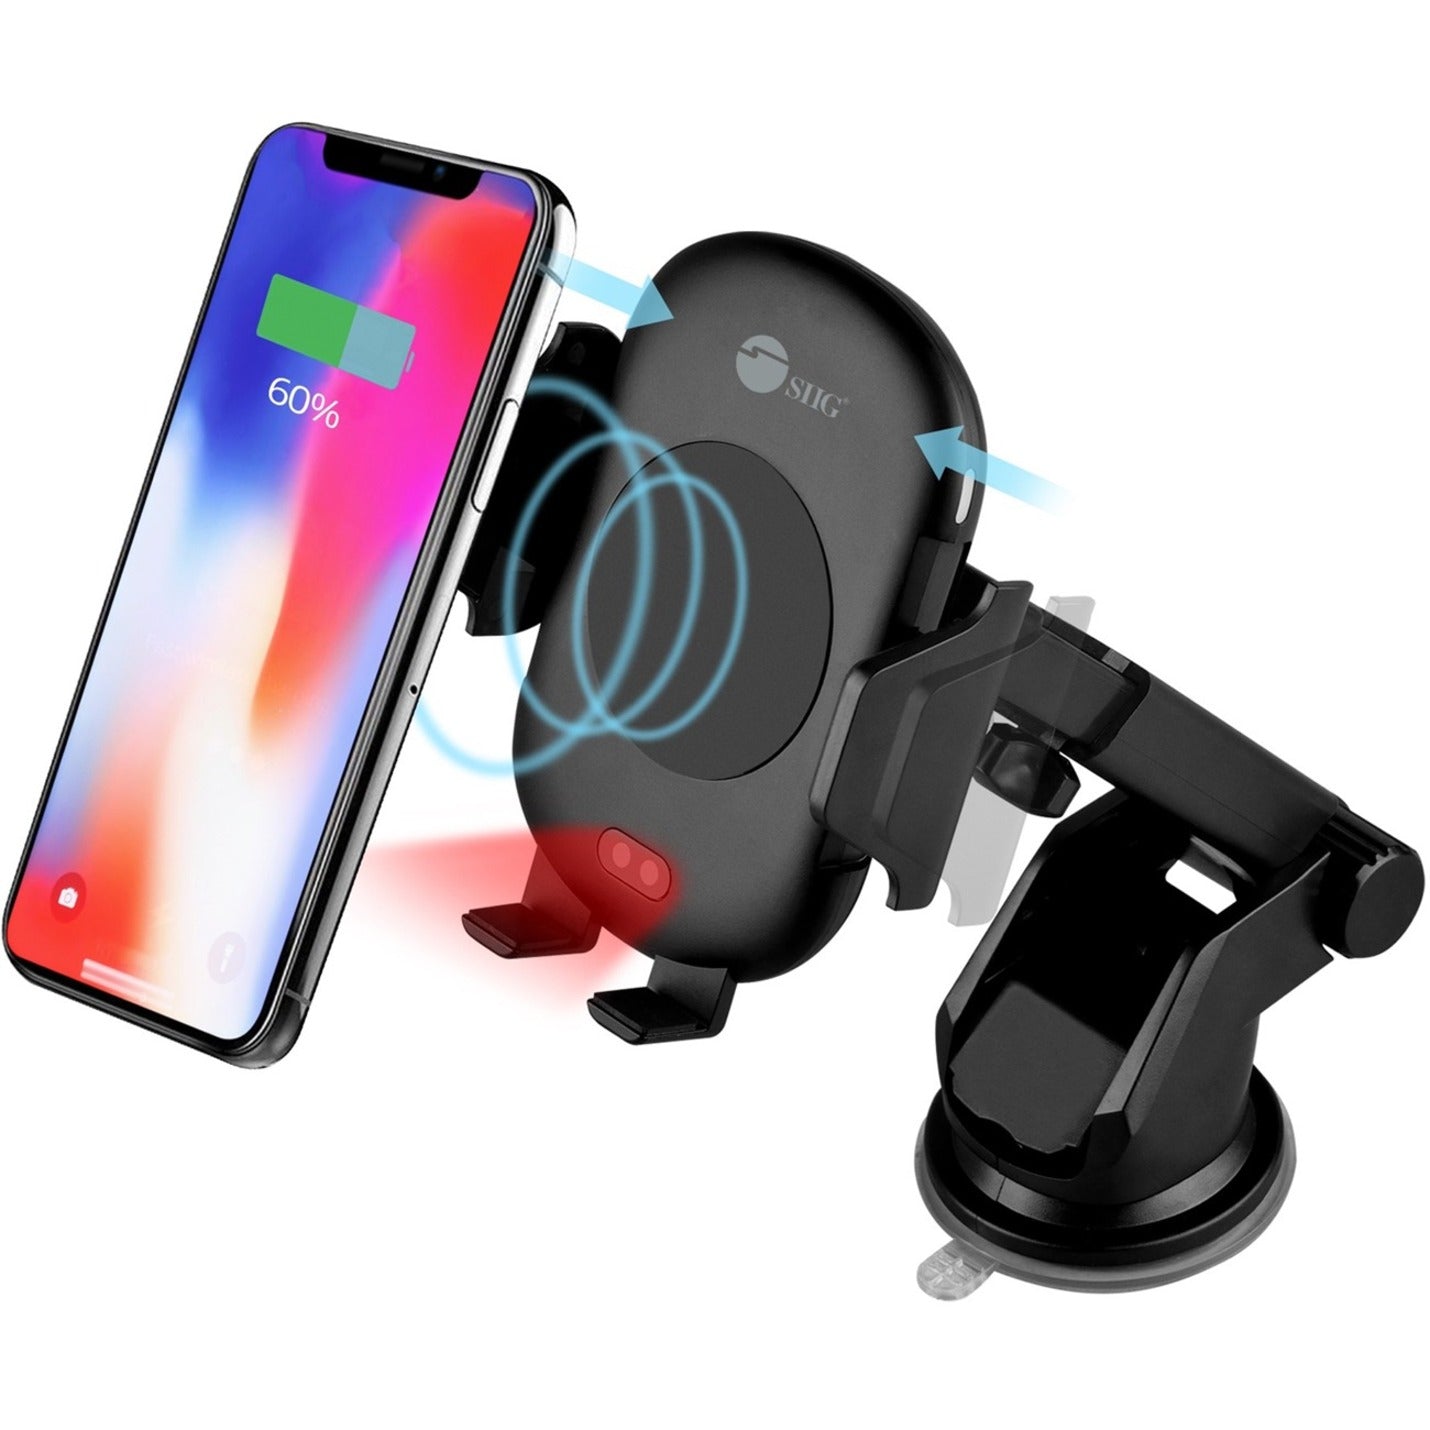 SIIG AC-PW1M11-S1 Auto-Clamping Wireless Car Charger Mount/Stand, Suction Cup, Air Vent, Wireless Charging